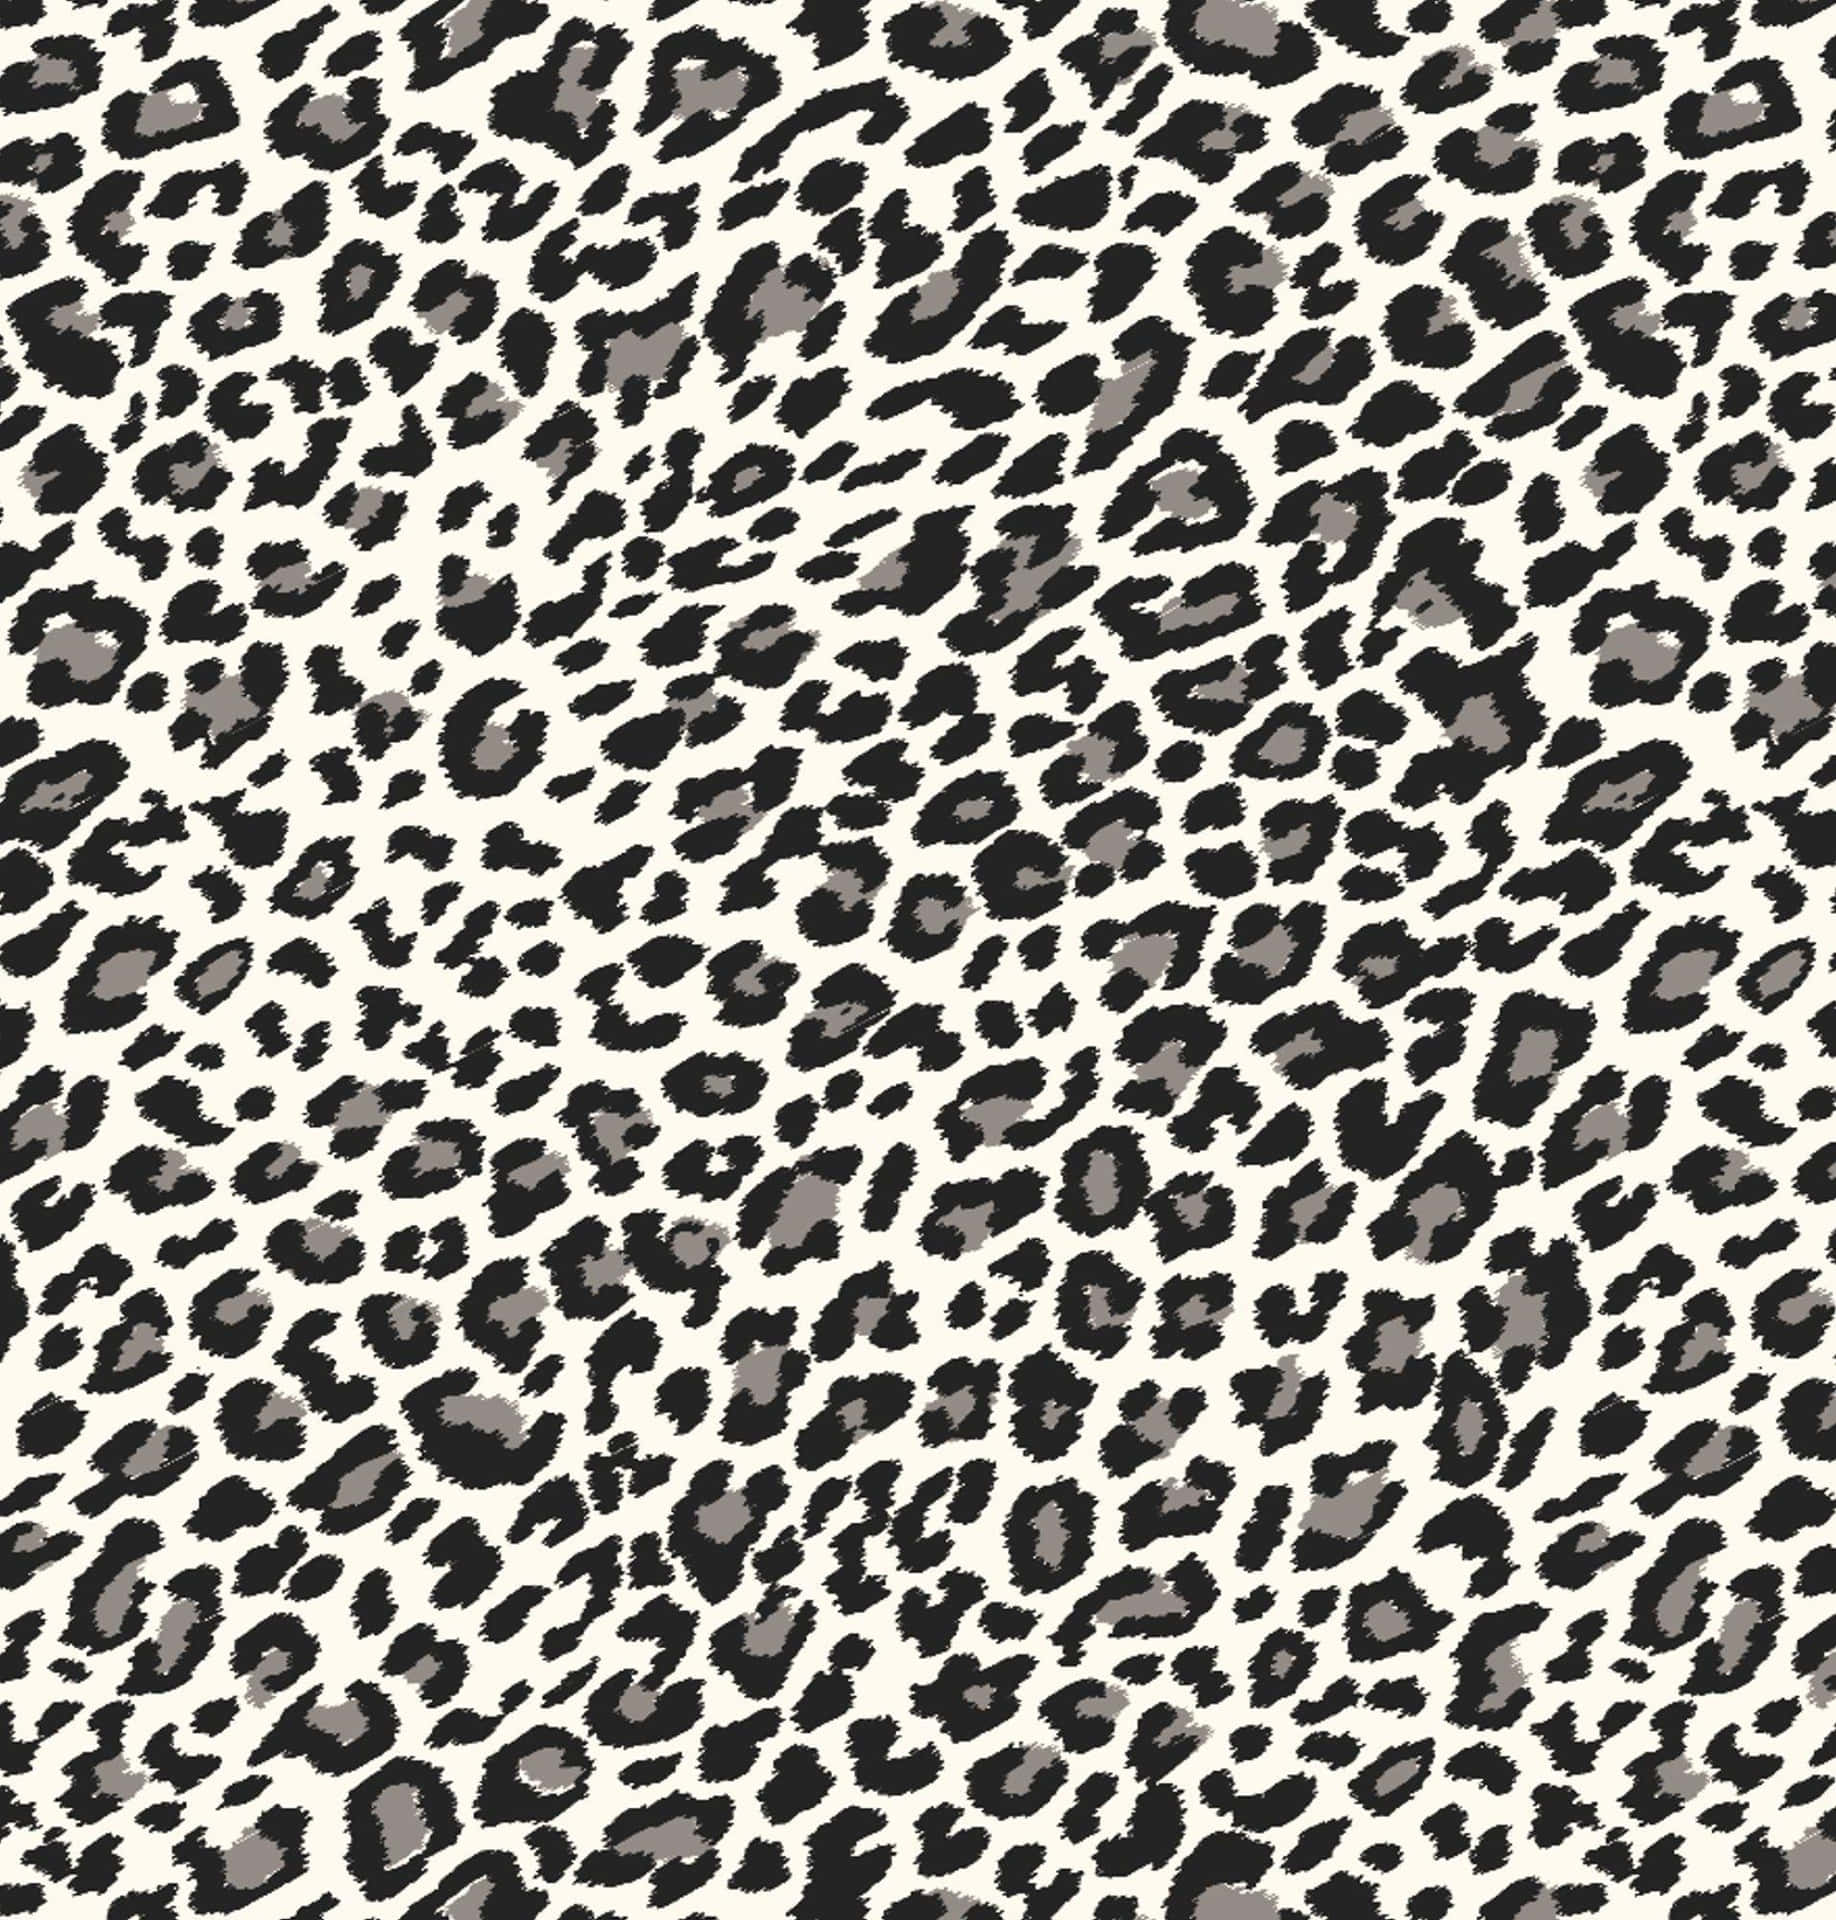 Bold Cheetah Print Background with Black and Tan Accents